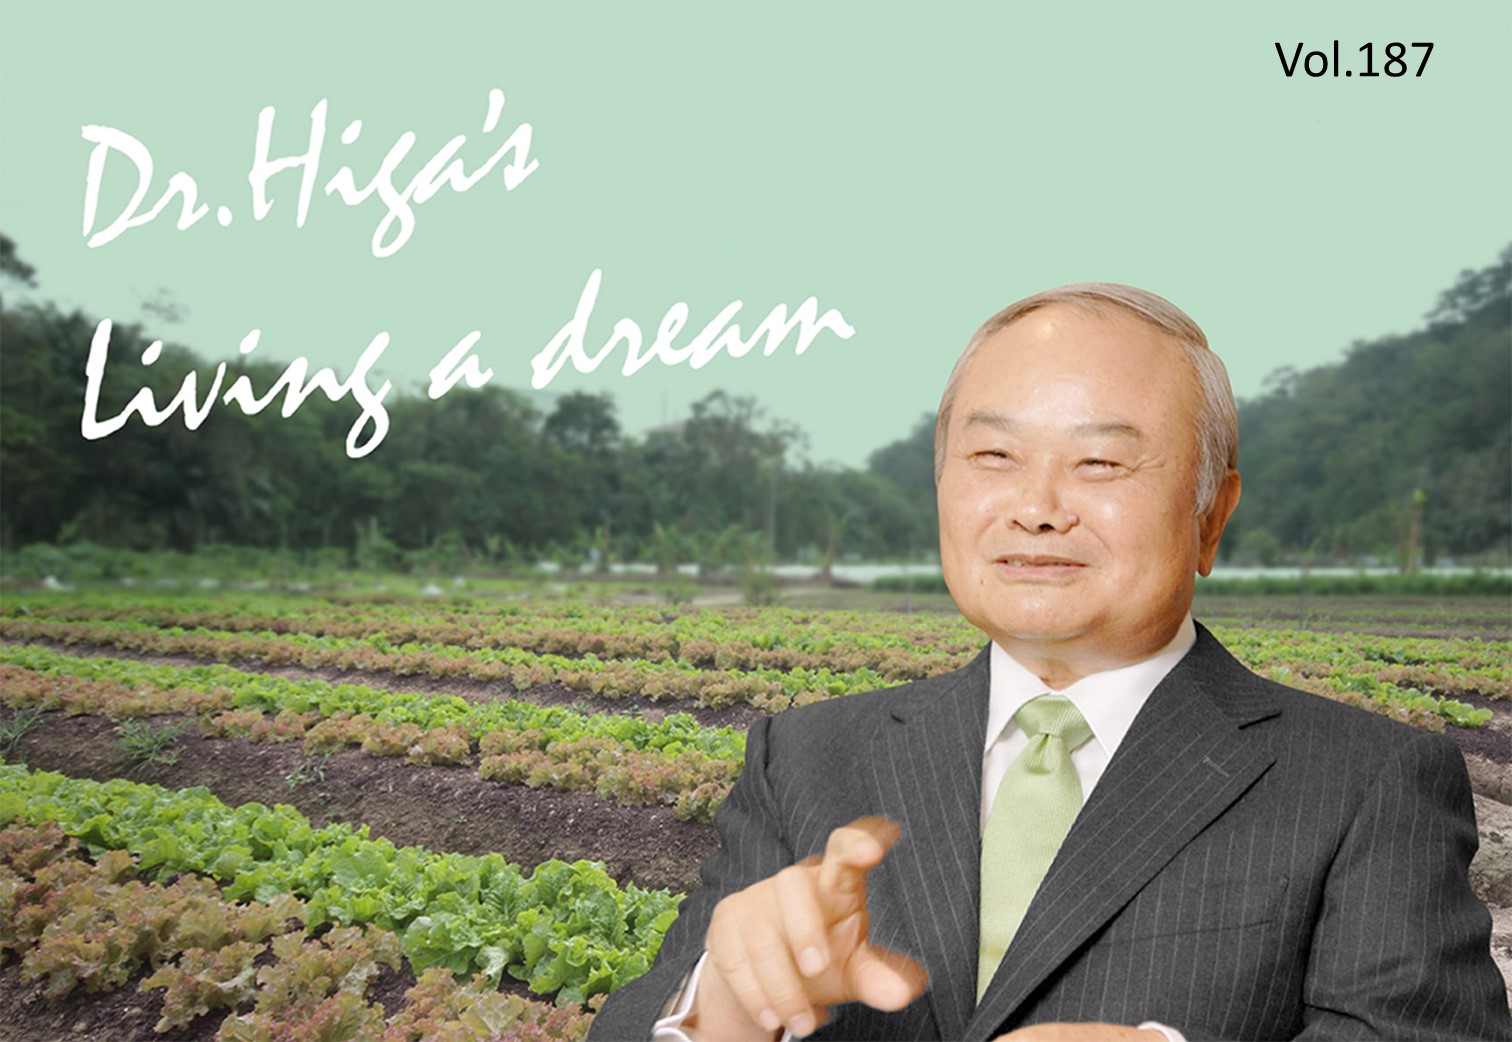 Dr. Higa's "Living a Dream": the latest article #187 is up!!!